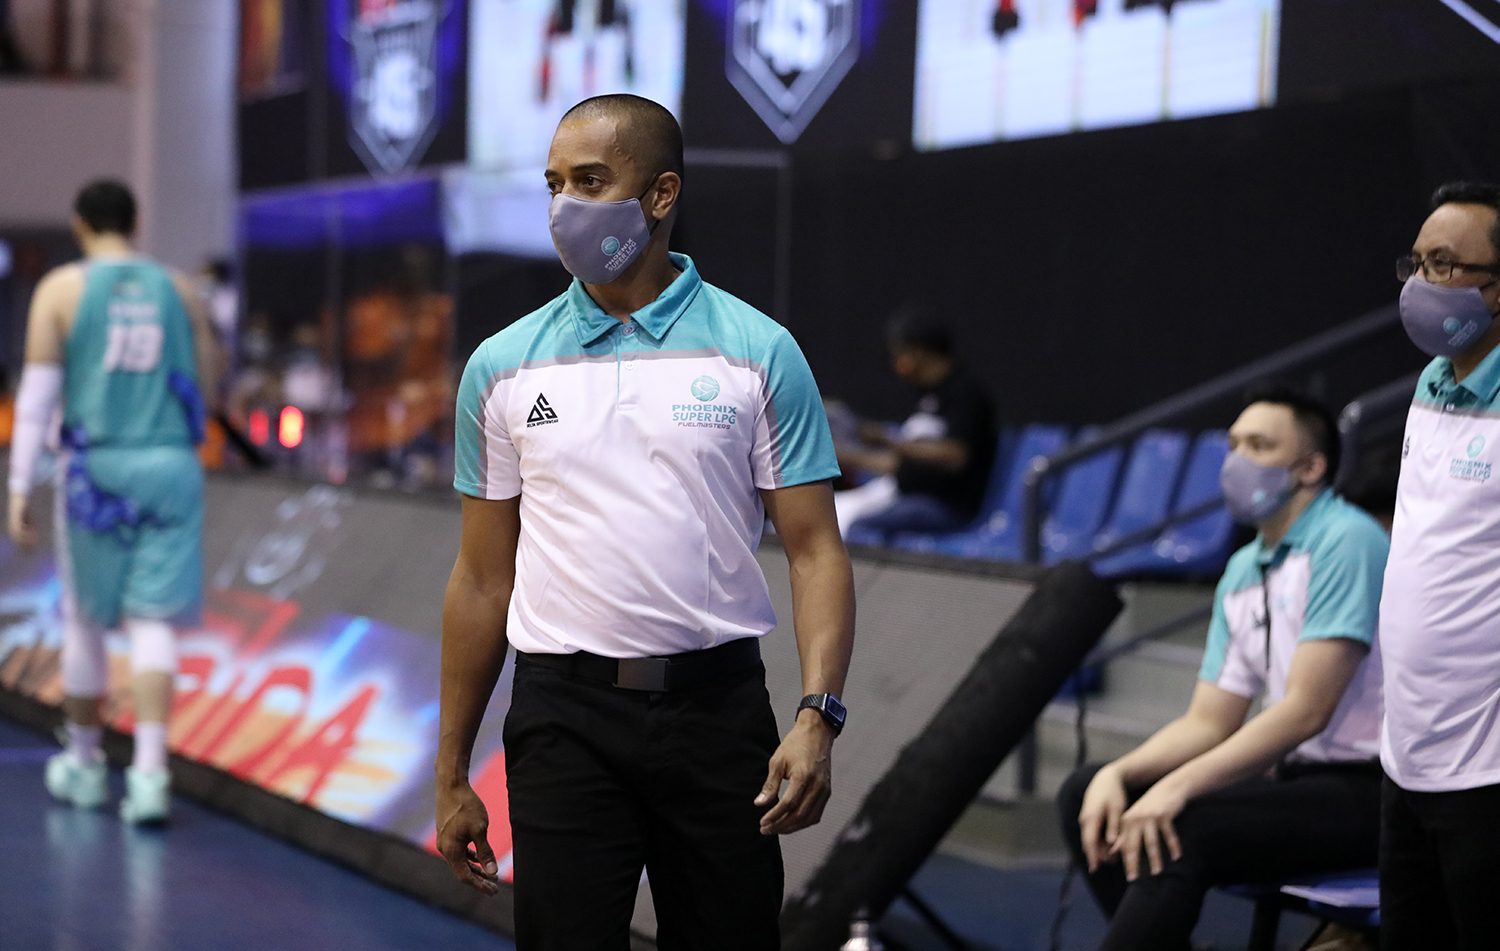 ‘We always do it for Calvin,’ says emotional Topex